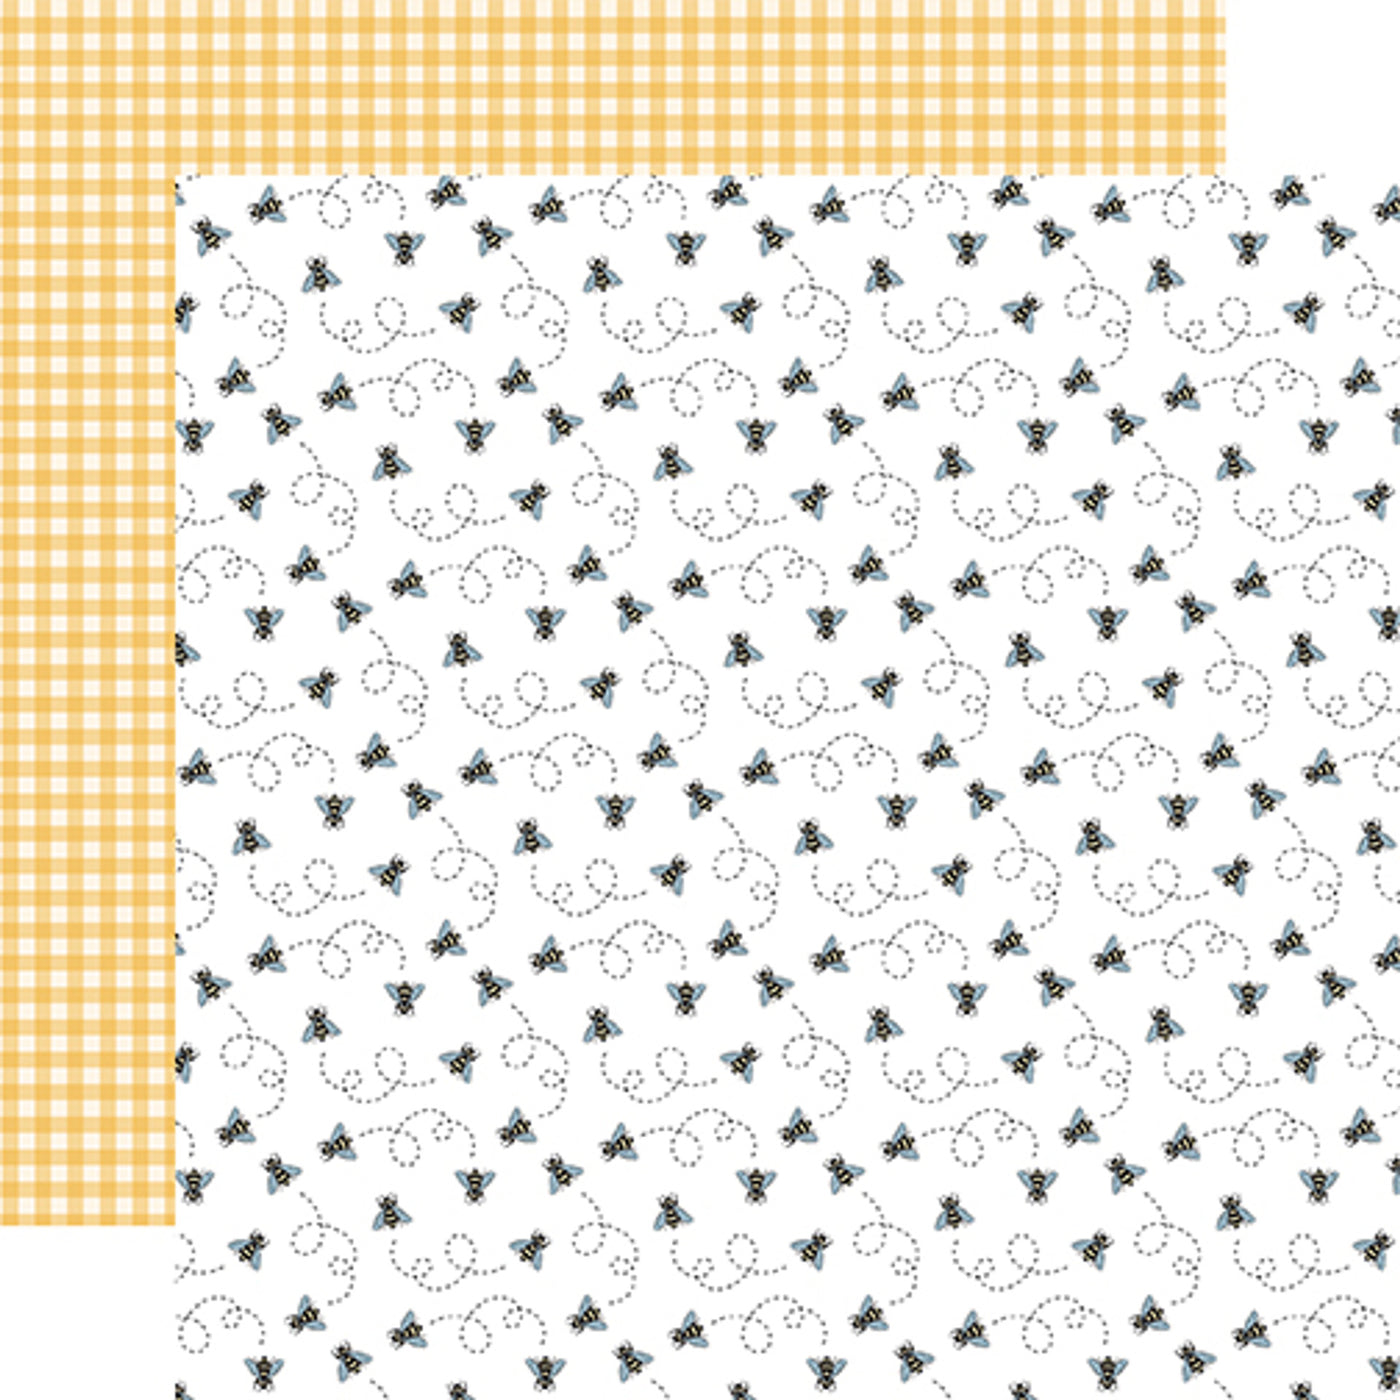 12x12 double-sided patterned paper. (Side A - flying honeybees on a white background, Side B - yellow gingham)